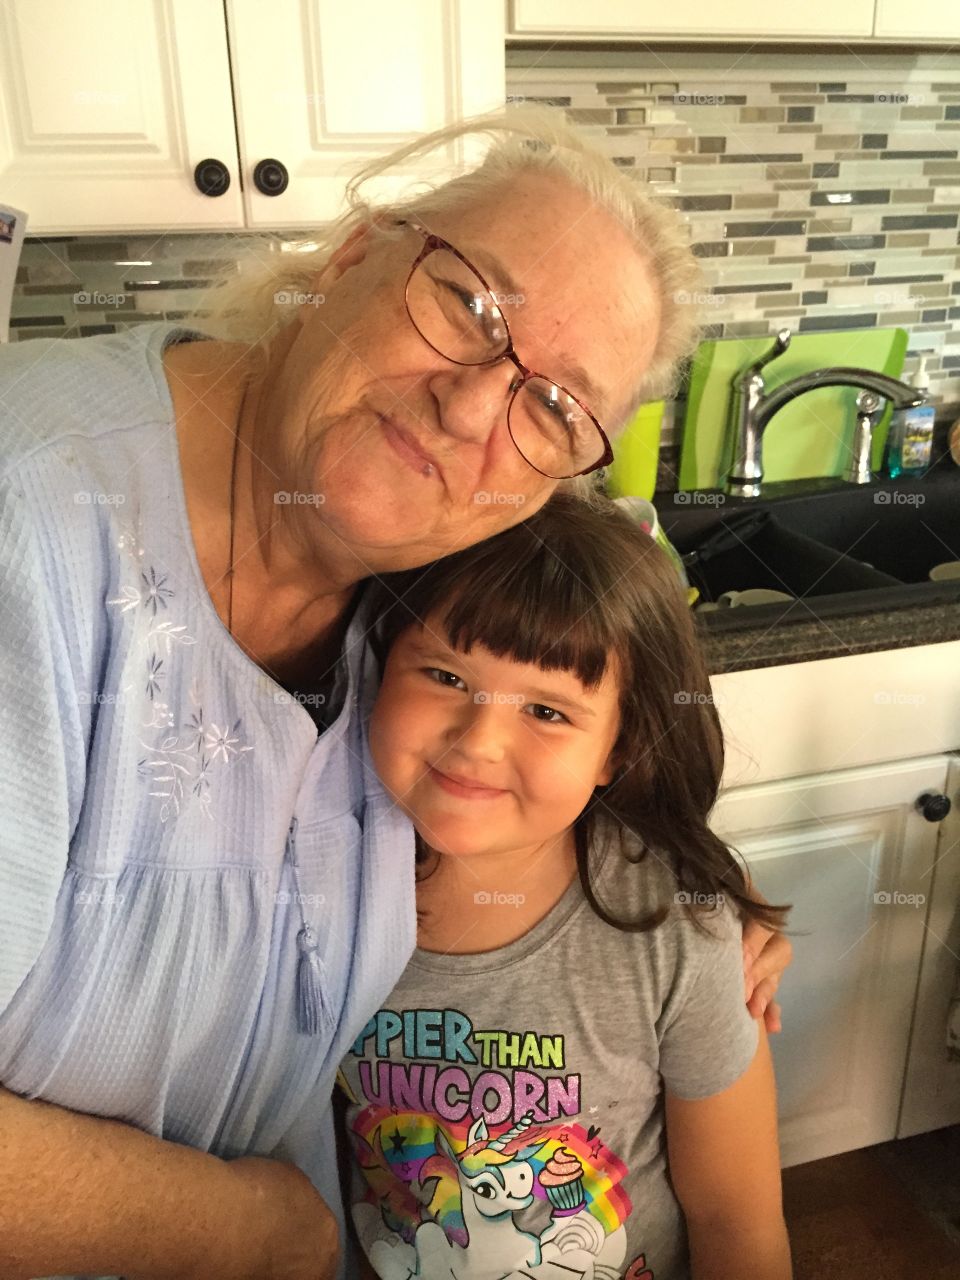 Grandma love. The connection between a grandmother and her granddaughter 